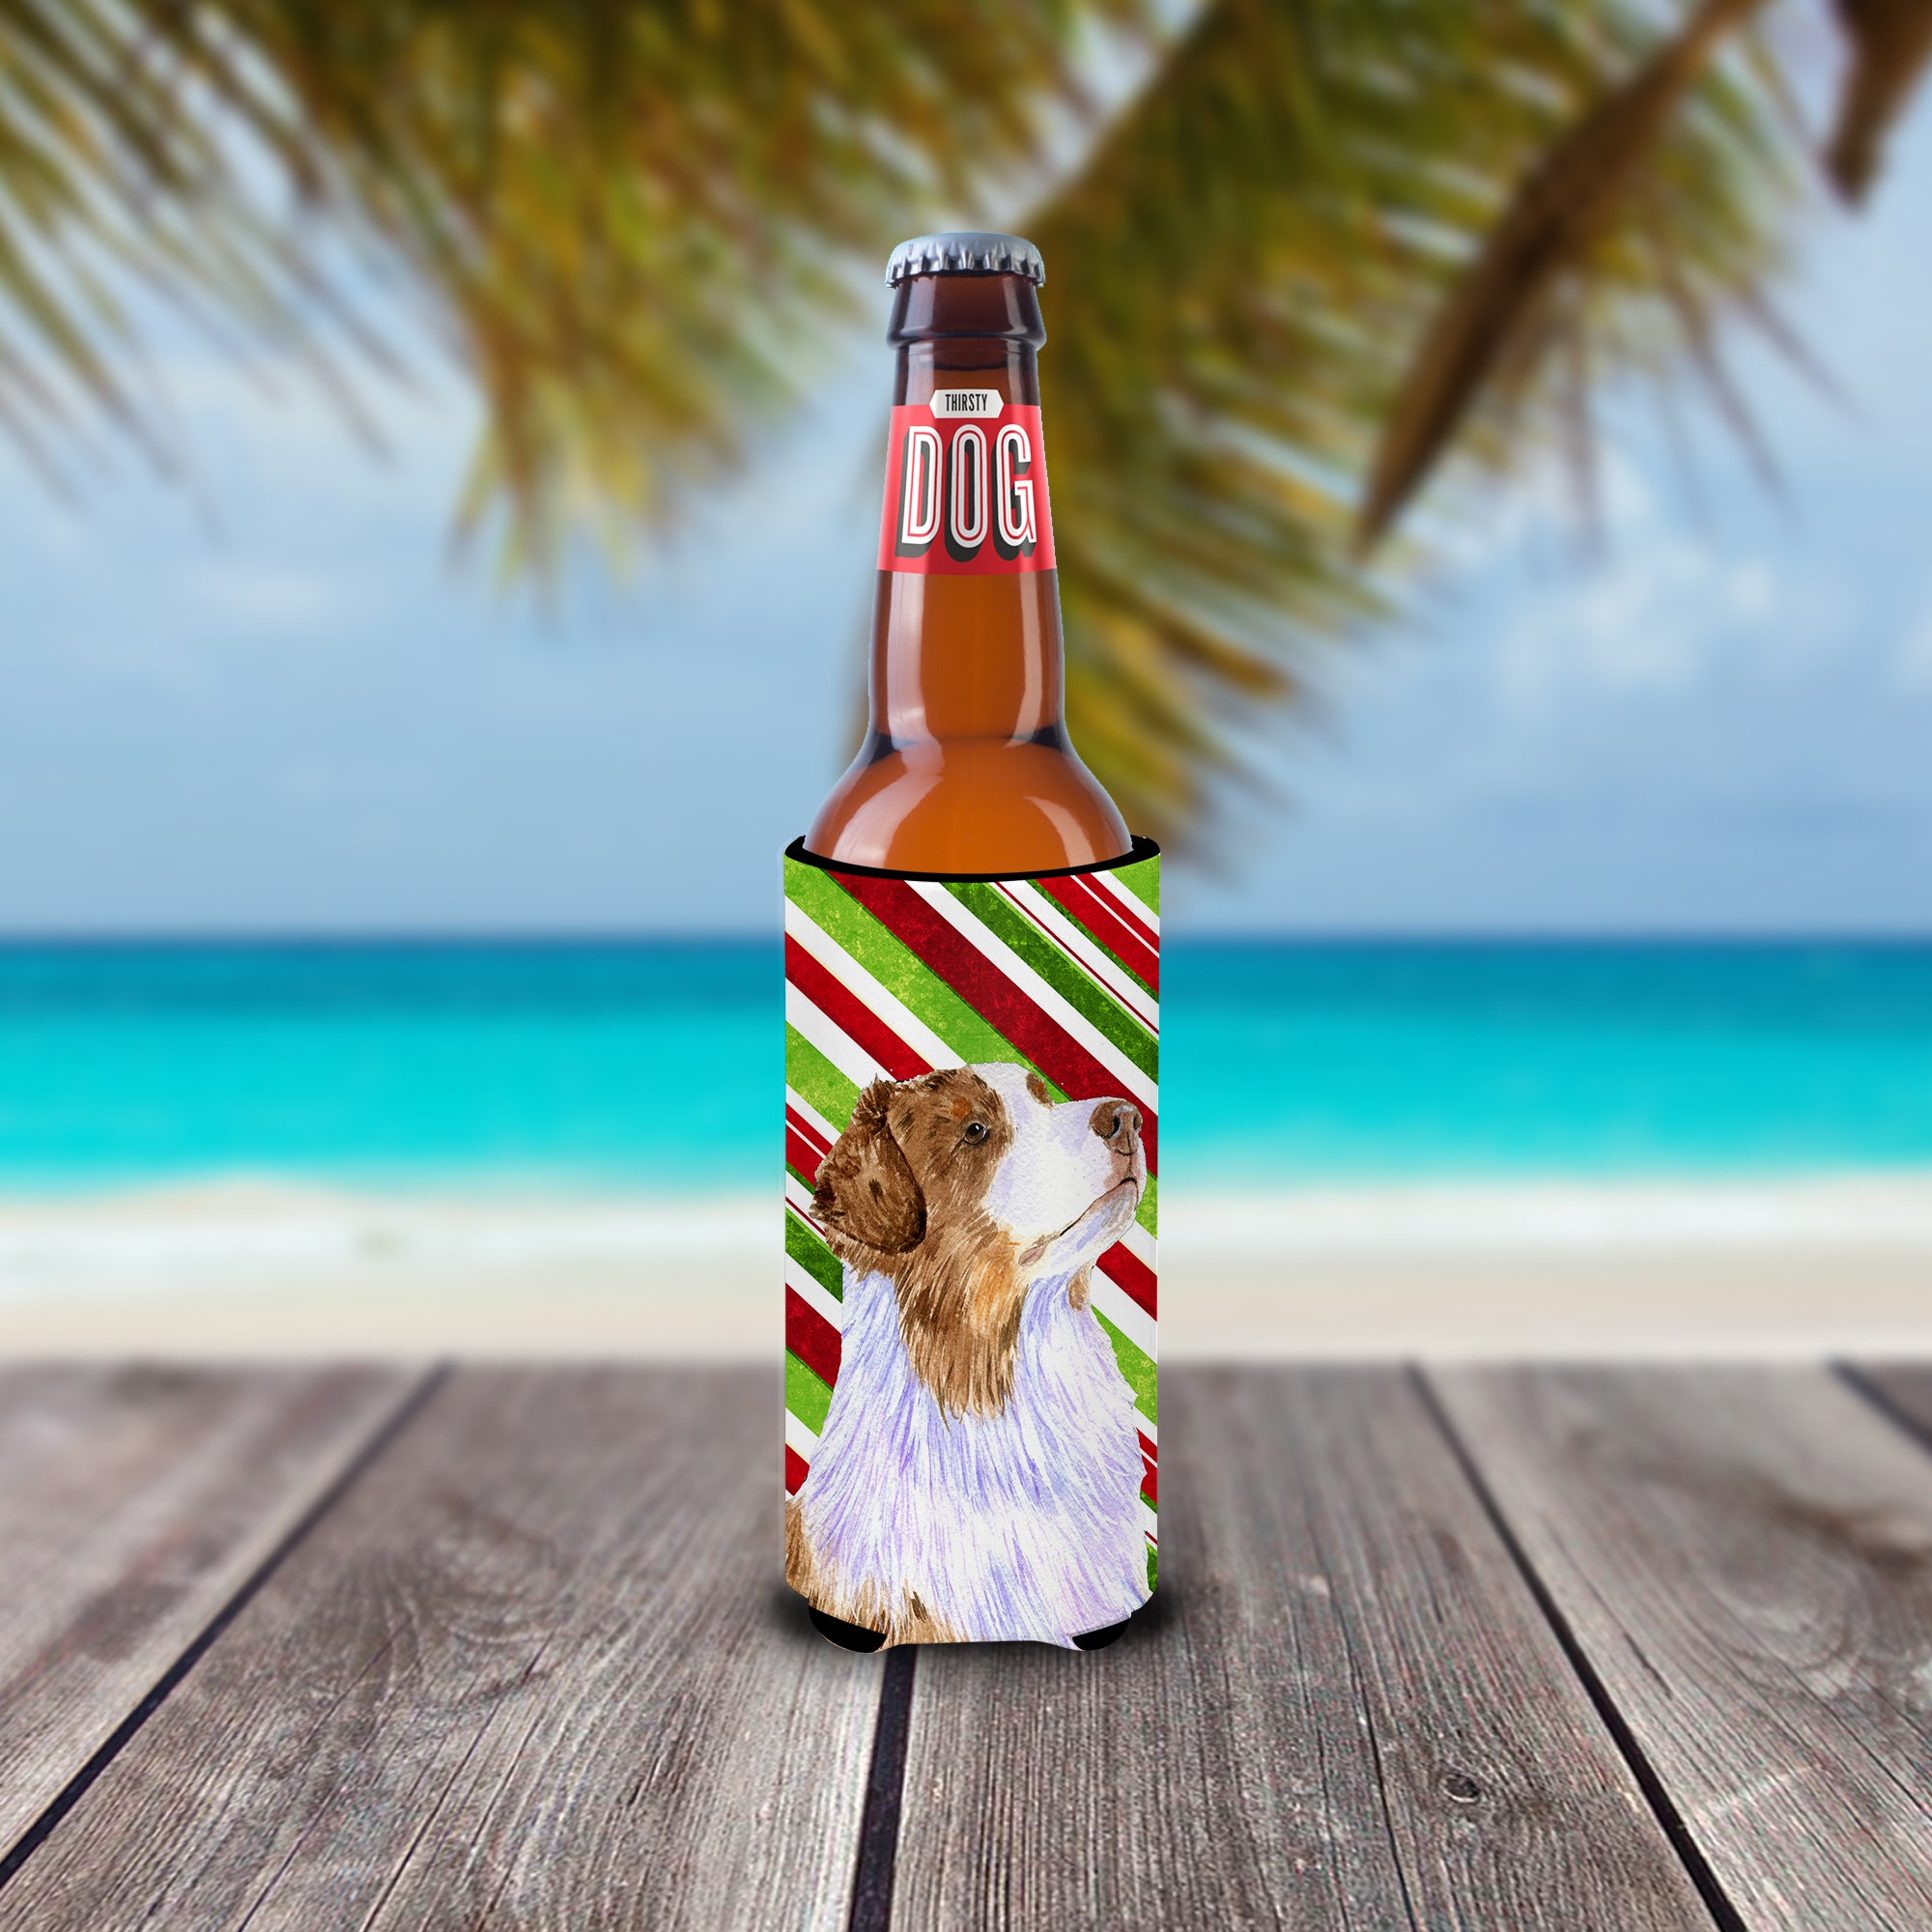 Australian Shepherd Candy Cane Holiday Christmas Ultra Beverage Insulators for slim cans LH9228MUK